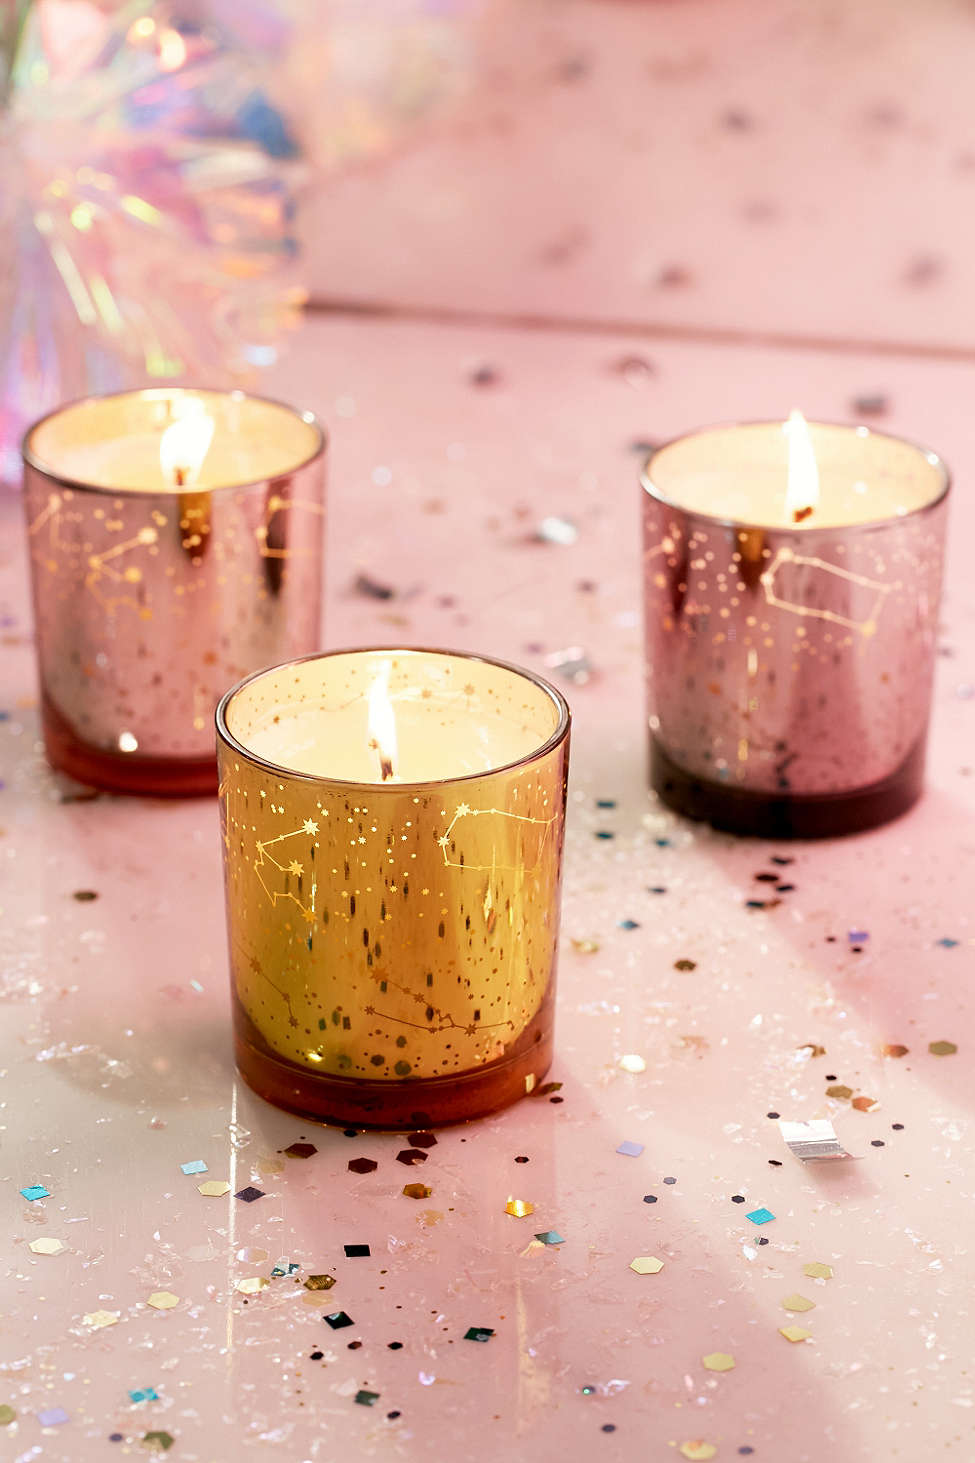 Sparkling candles from Urban Outfitters